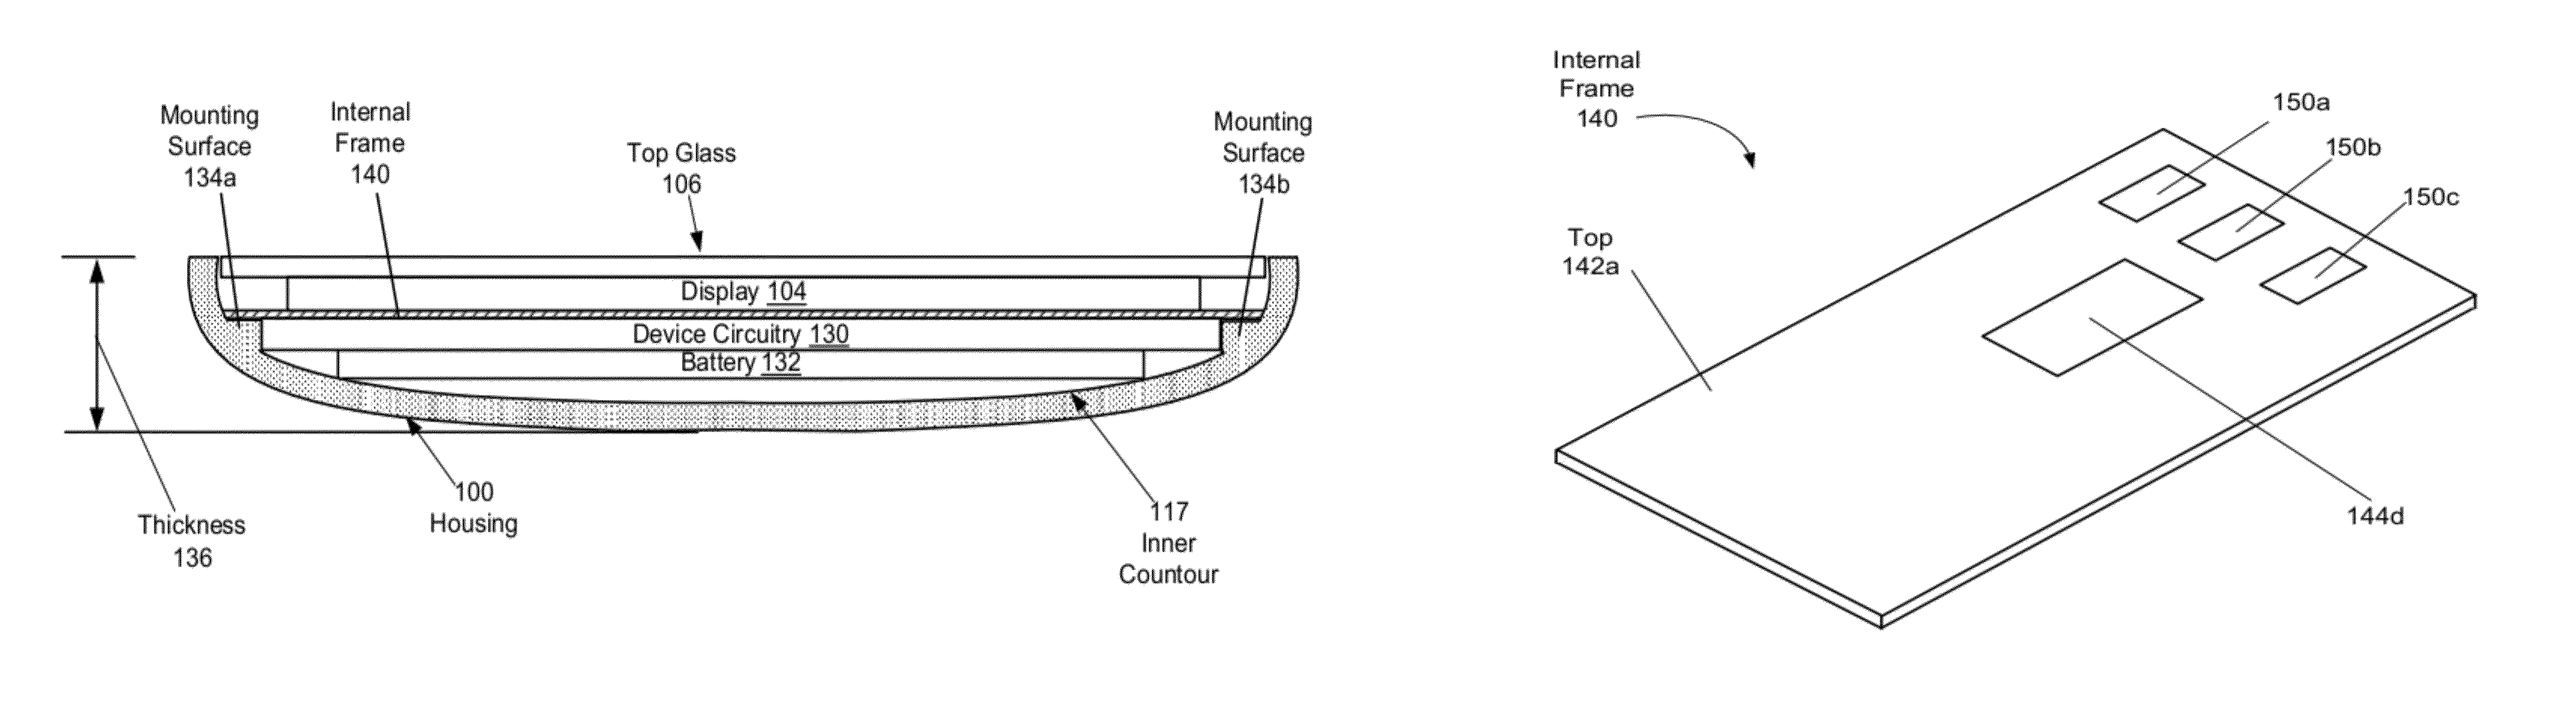 Internal frame optimized for stiffness and heat transfer